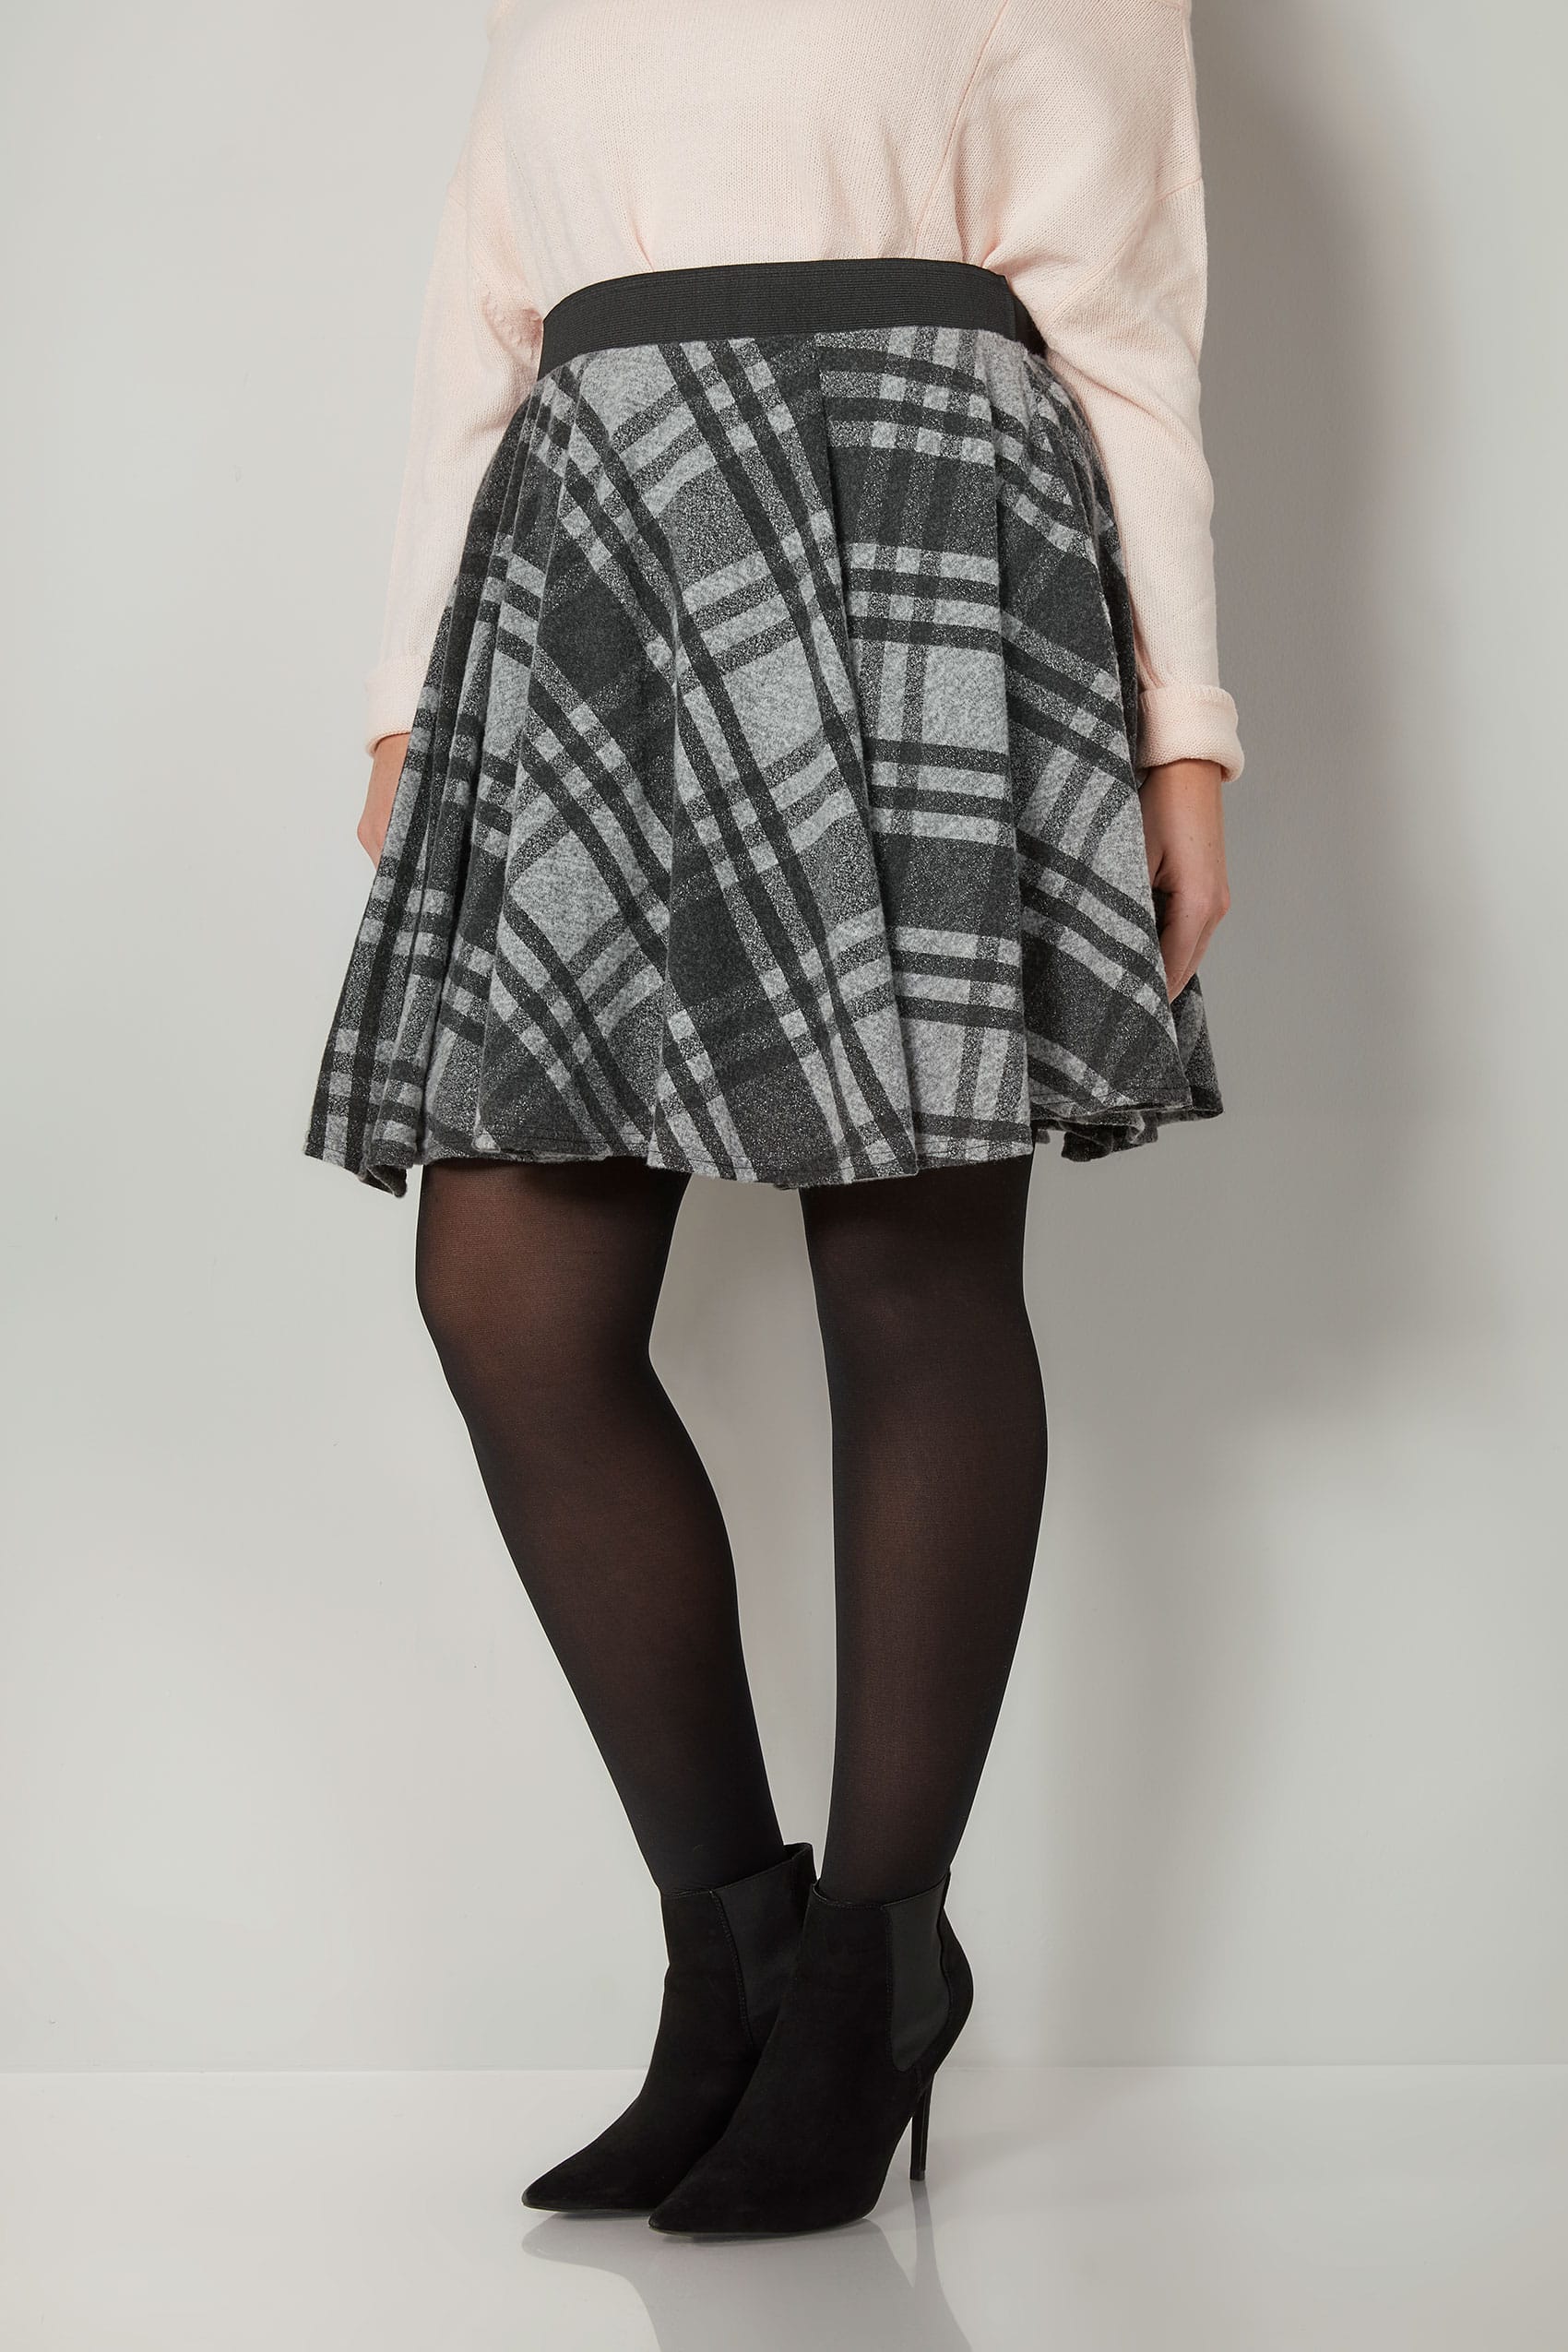 LIMITED COLLECTION Grey Checked Skater Skirt, plus size 16 to 32